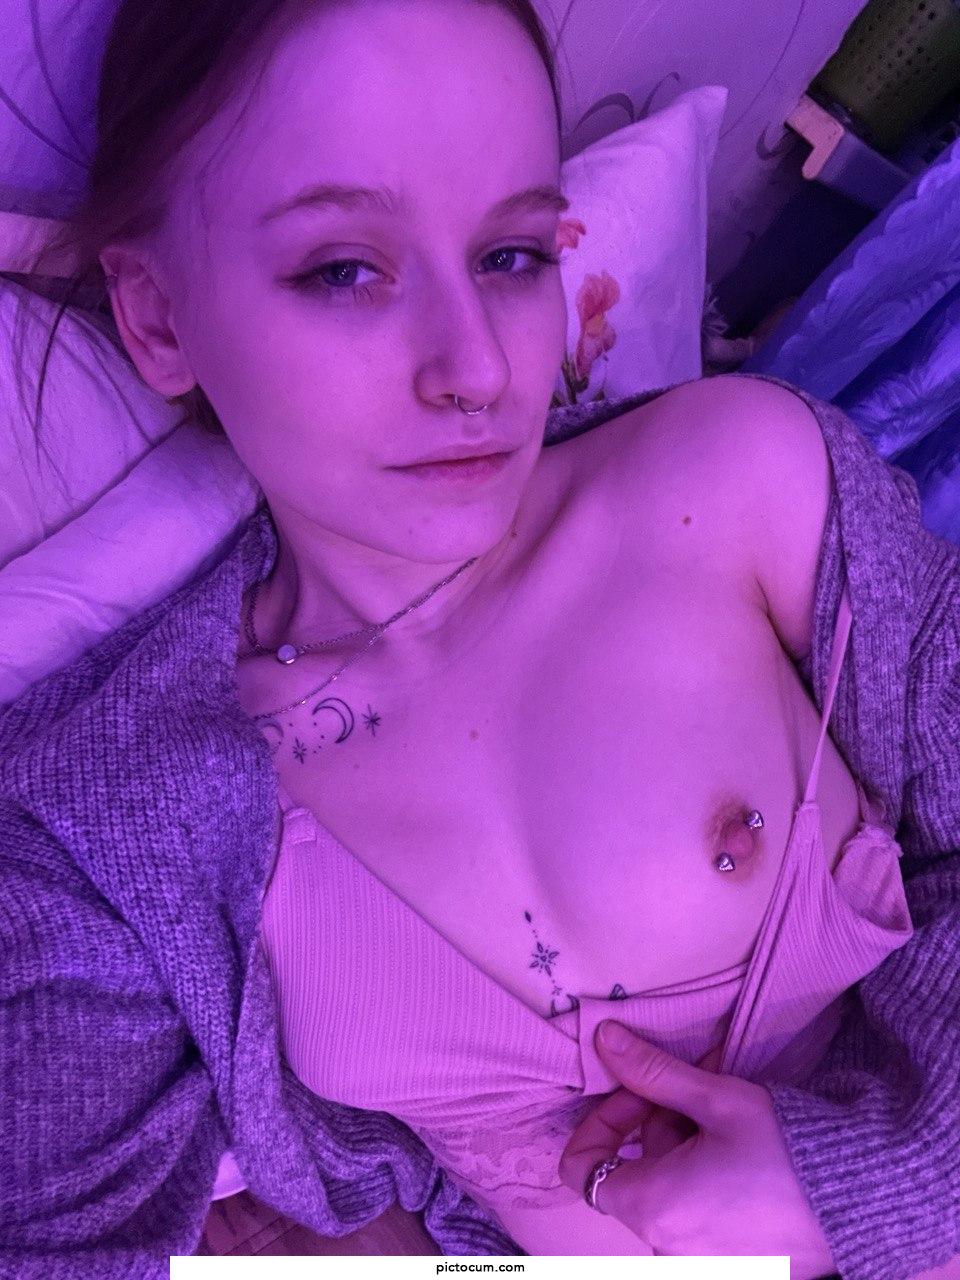 Showing you my tits